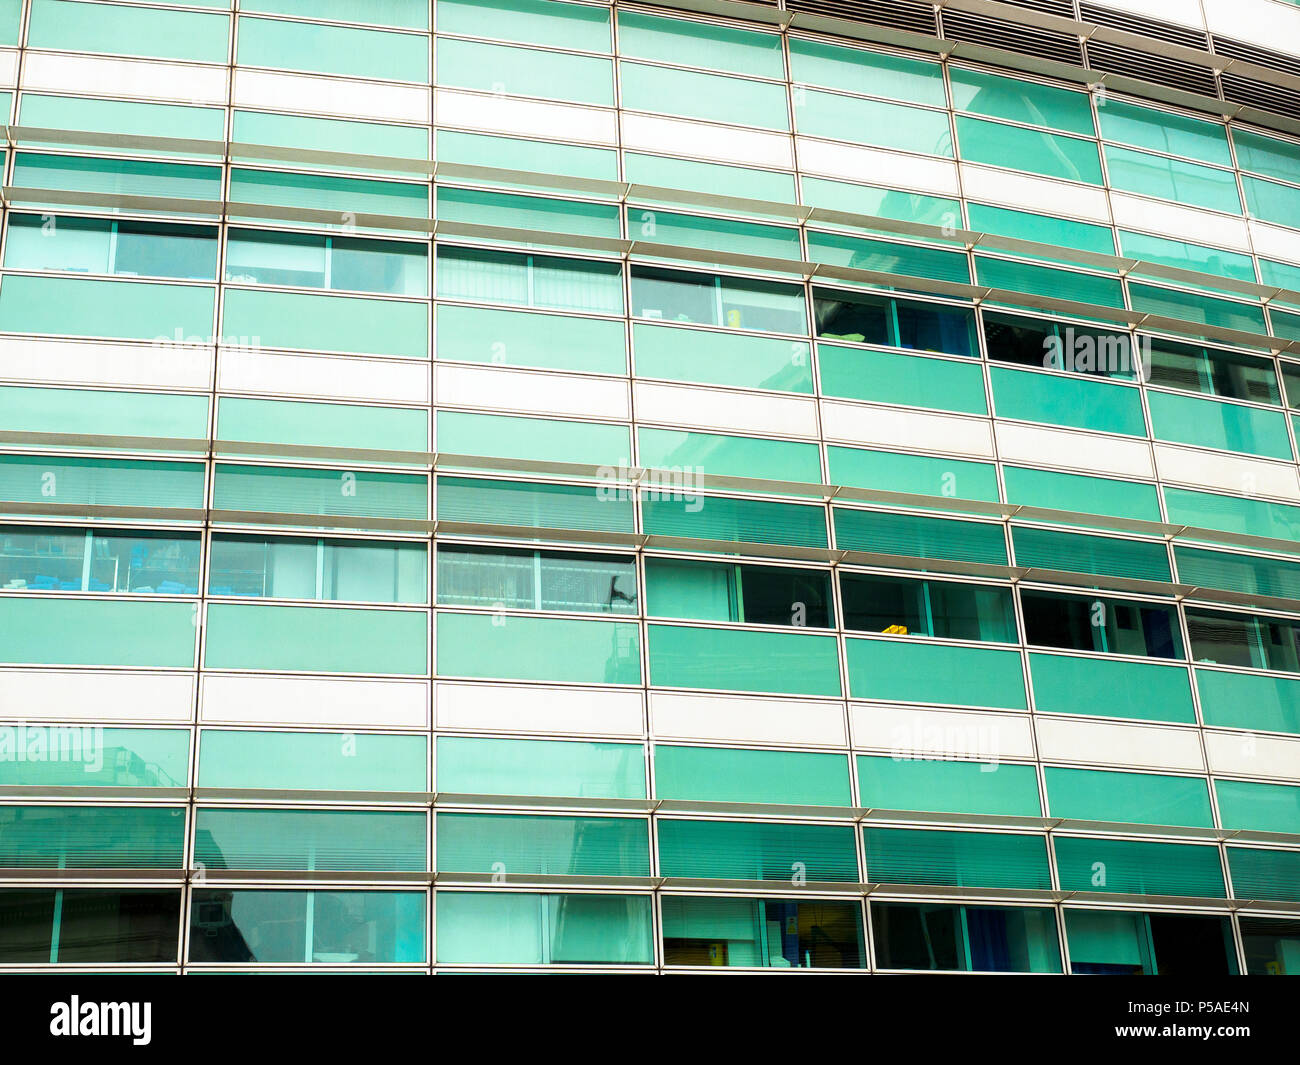 Facade of the Elizabeth Garrett Anderson and Obstetric Hospital located in the University College Hospital - London, England Stock Photo